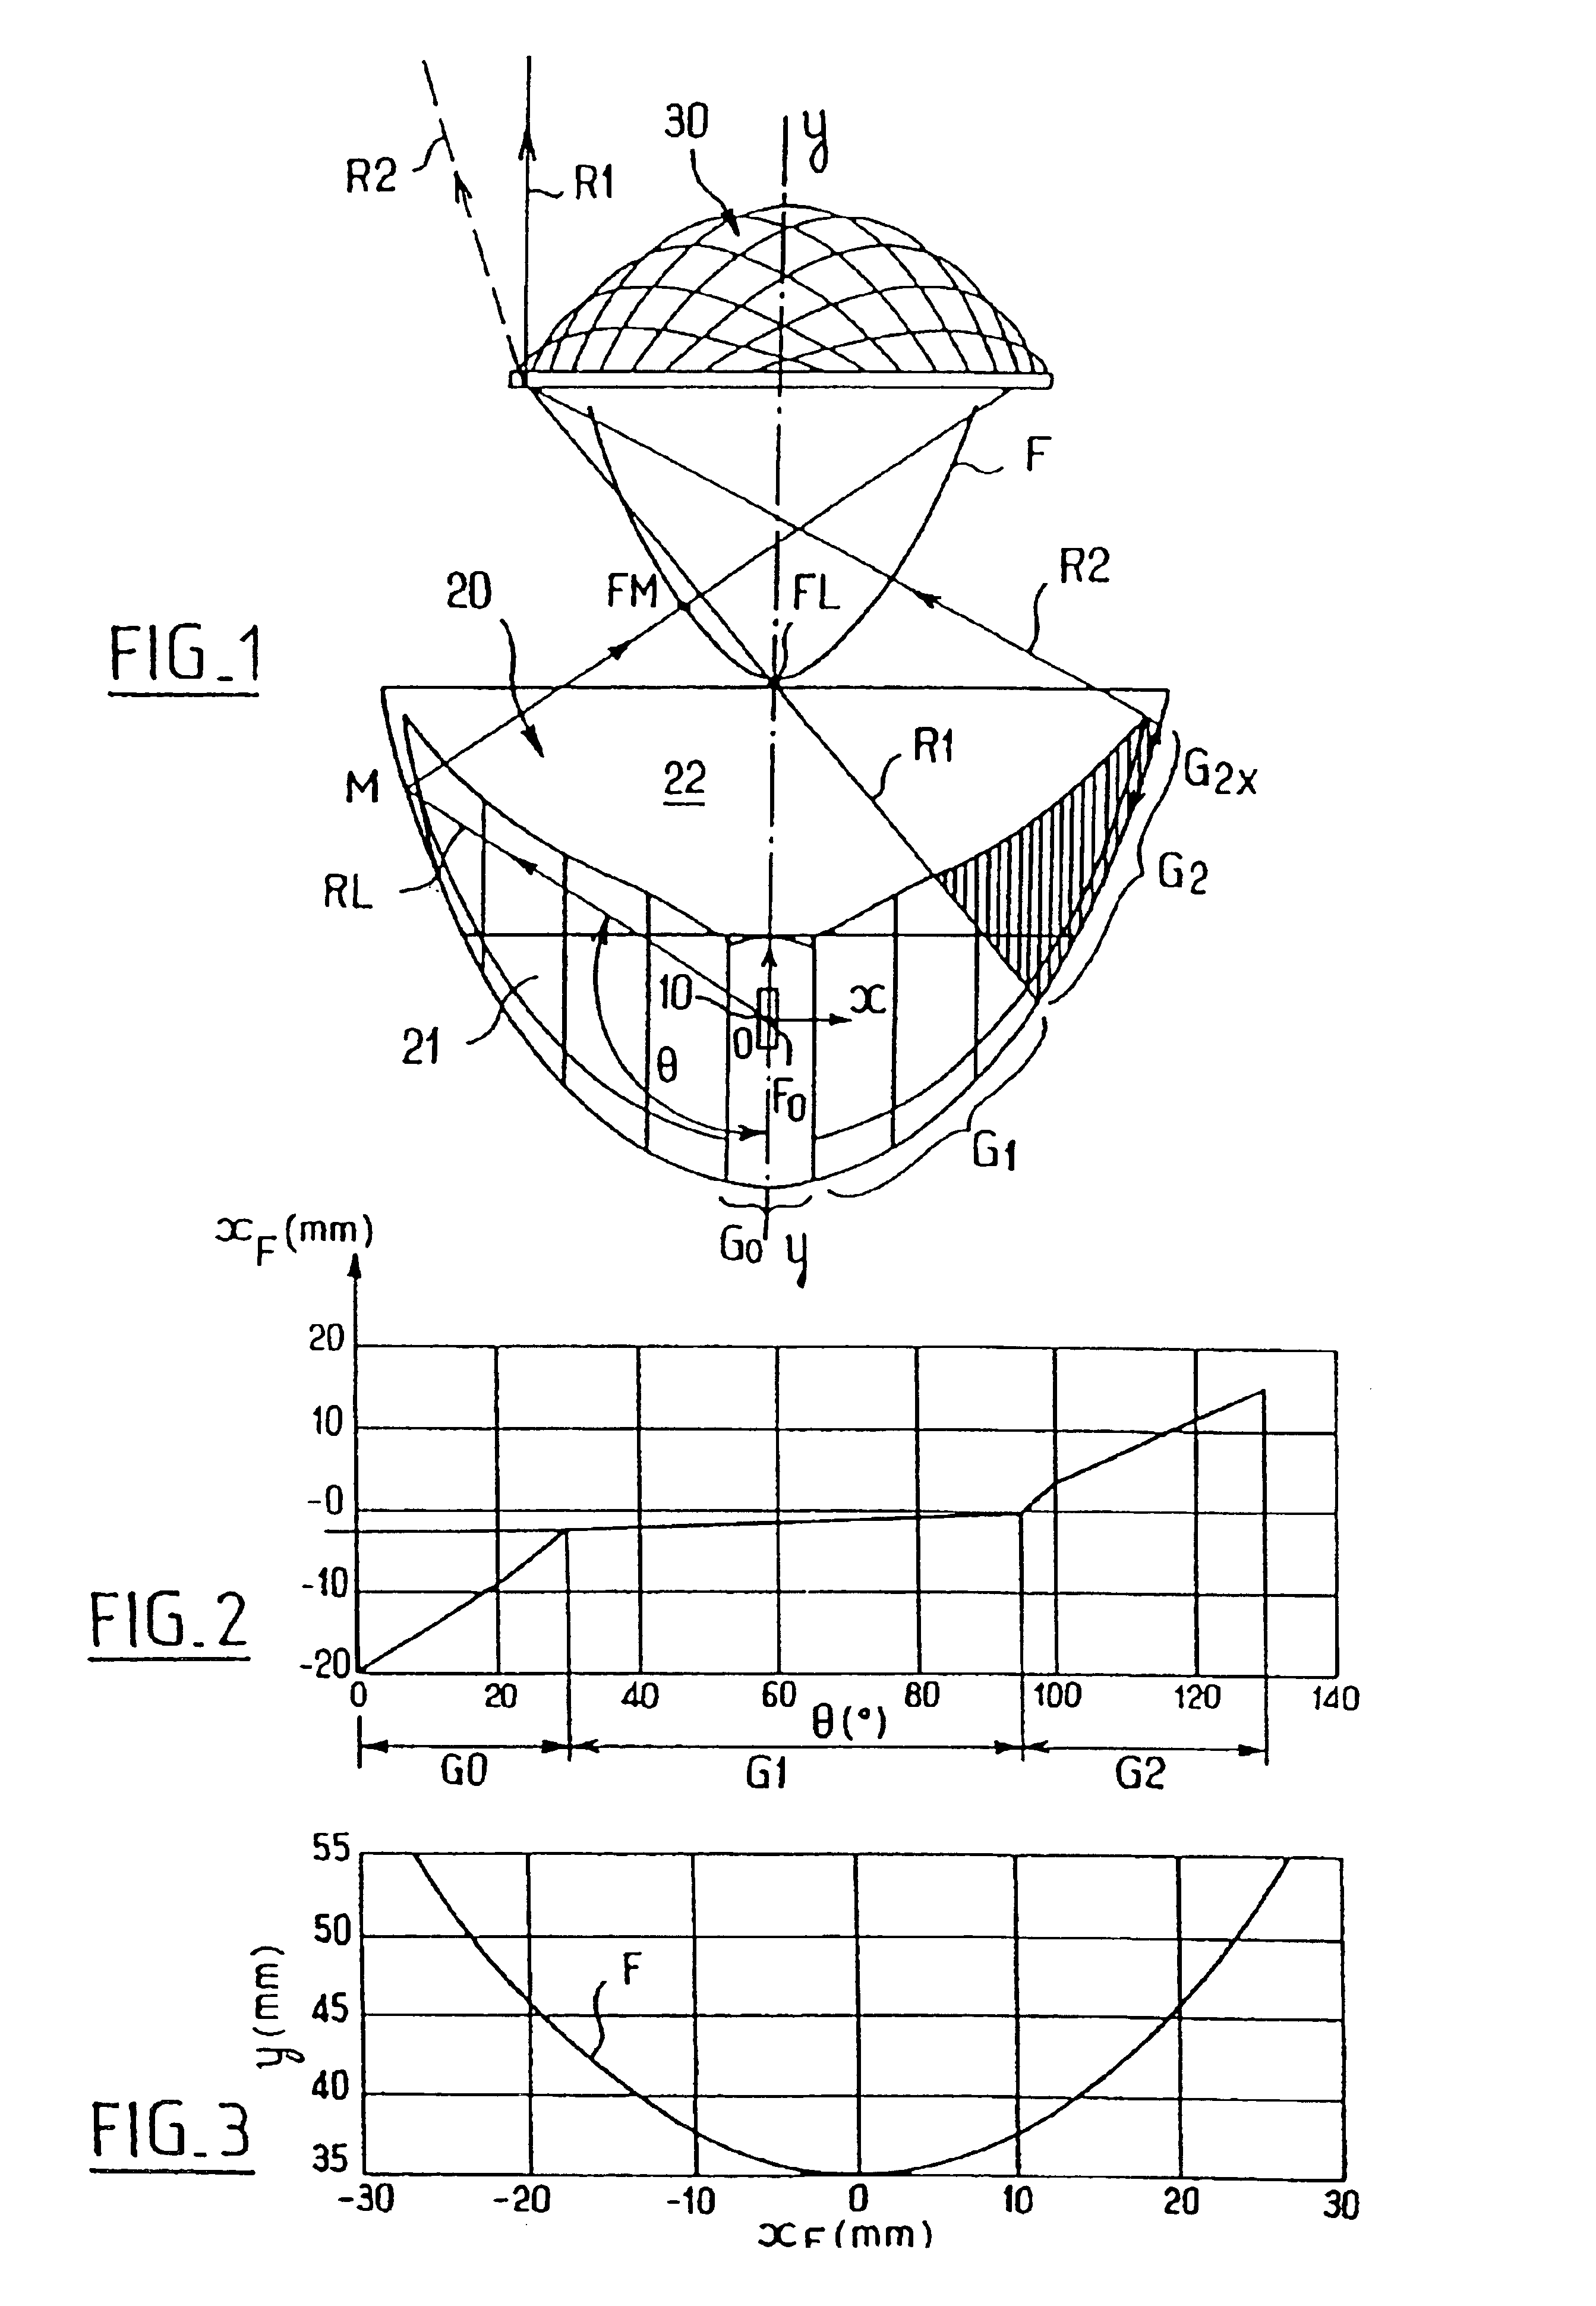 Motor vehicle headlamp of the elliptical type capable of emitting a beam without cut-off